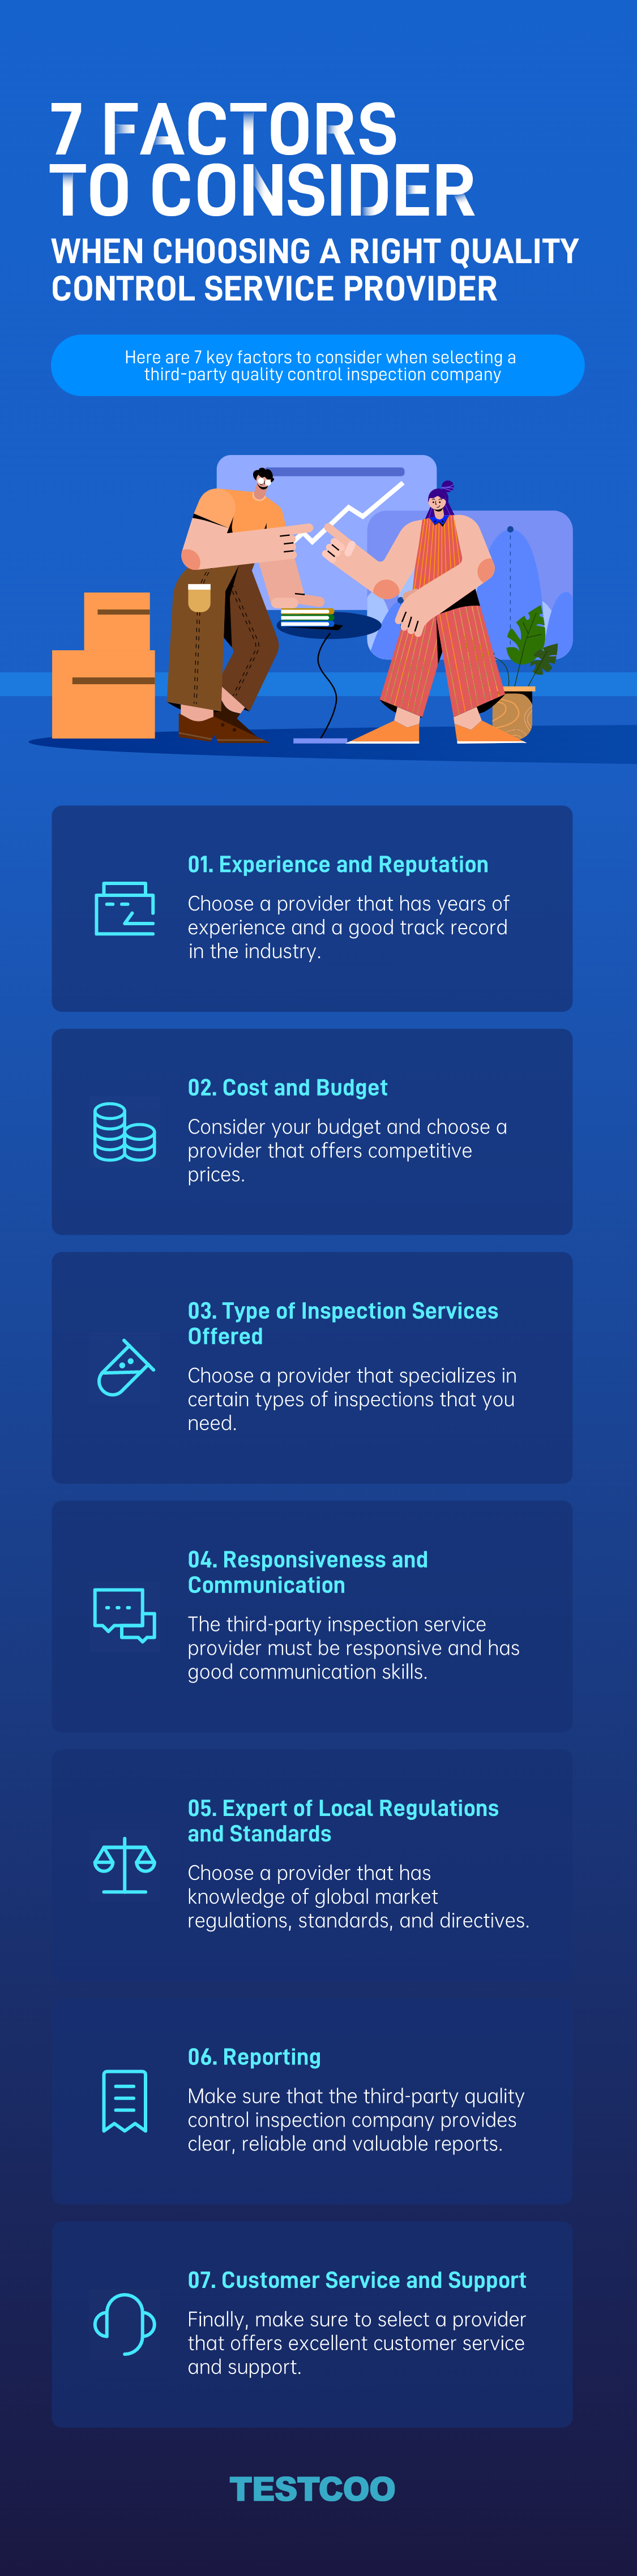 7 Factors to Consider When Choosing a Quality Control Service Provider